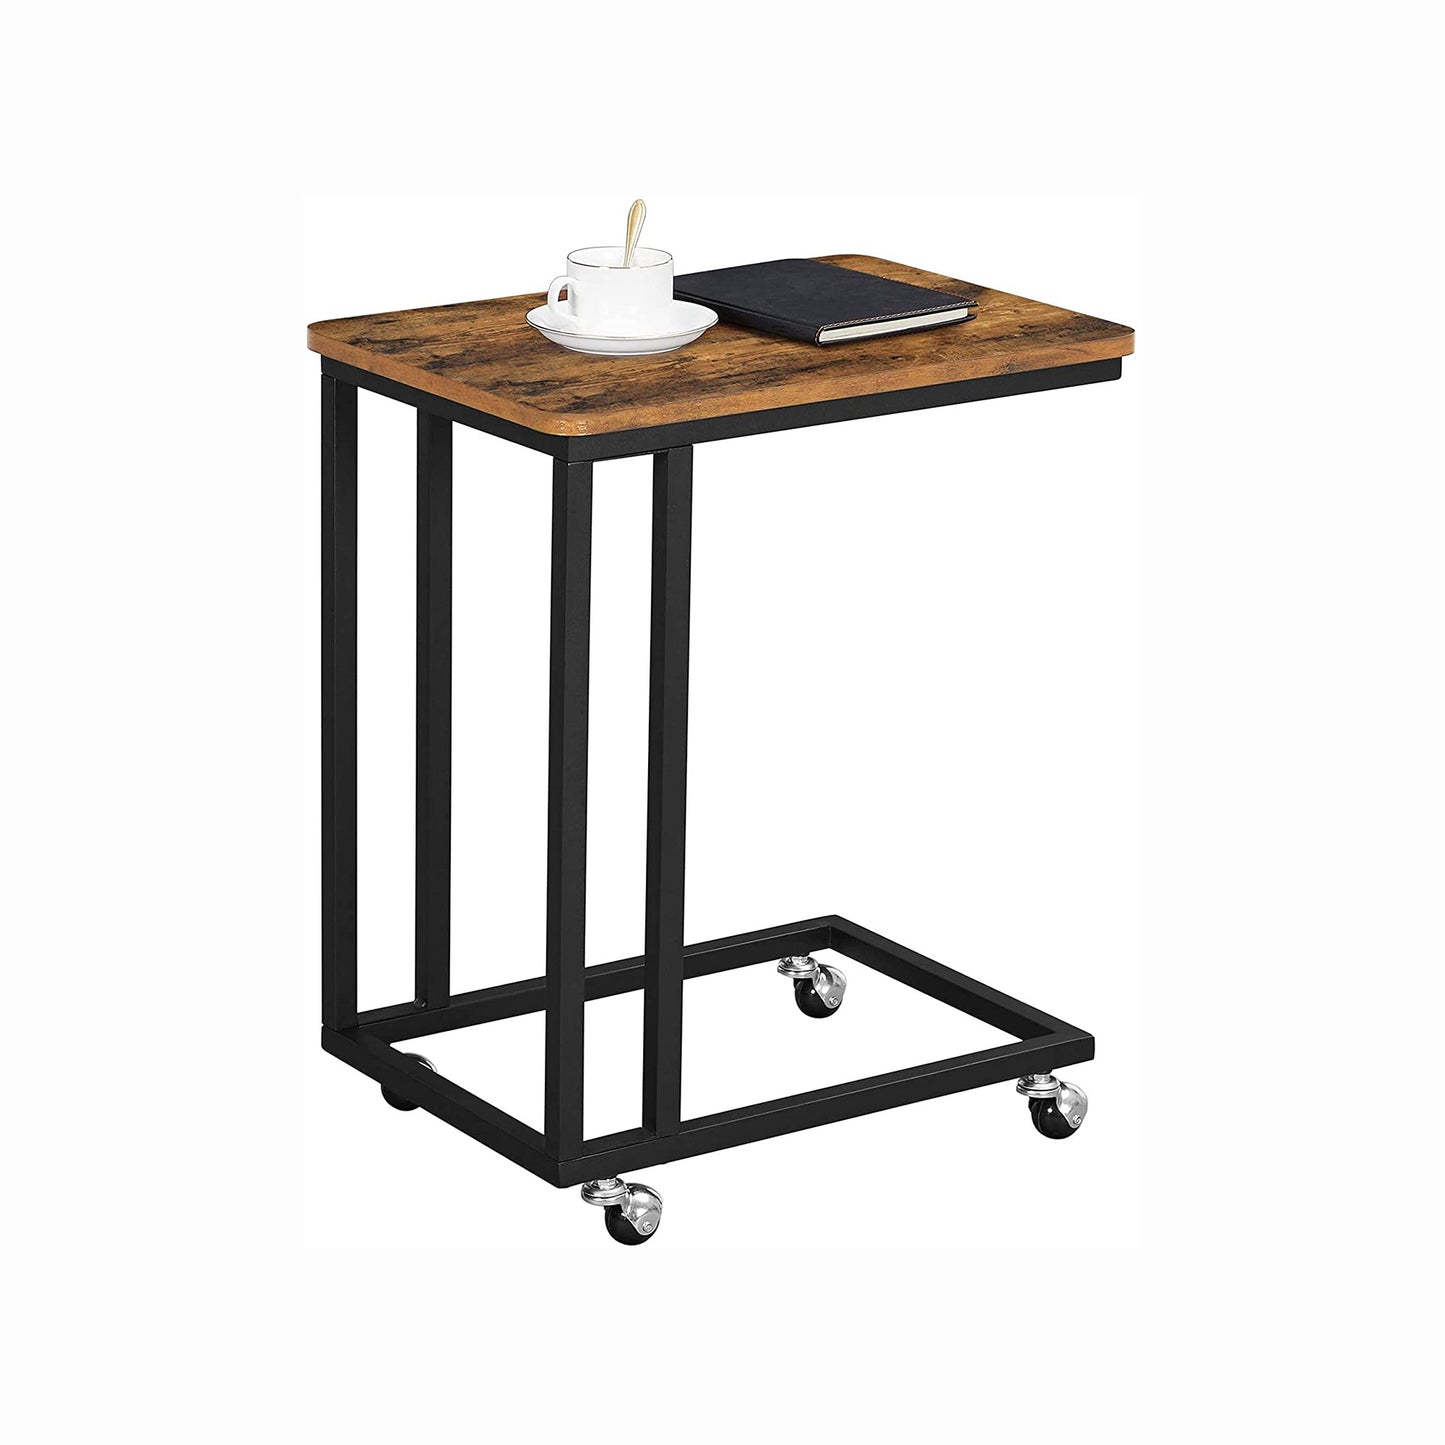 End Table, Industrial Side Table, Easy to Assemble, Coffee Table, for Coffee Laptop, with Metal Frame and Rolling Castors